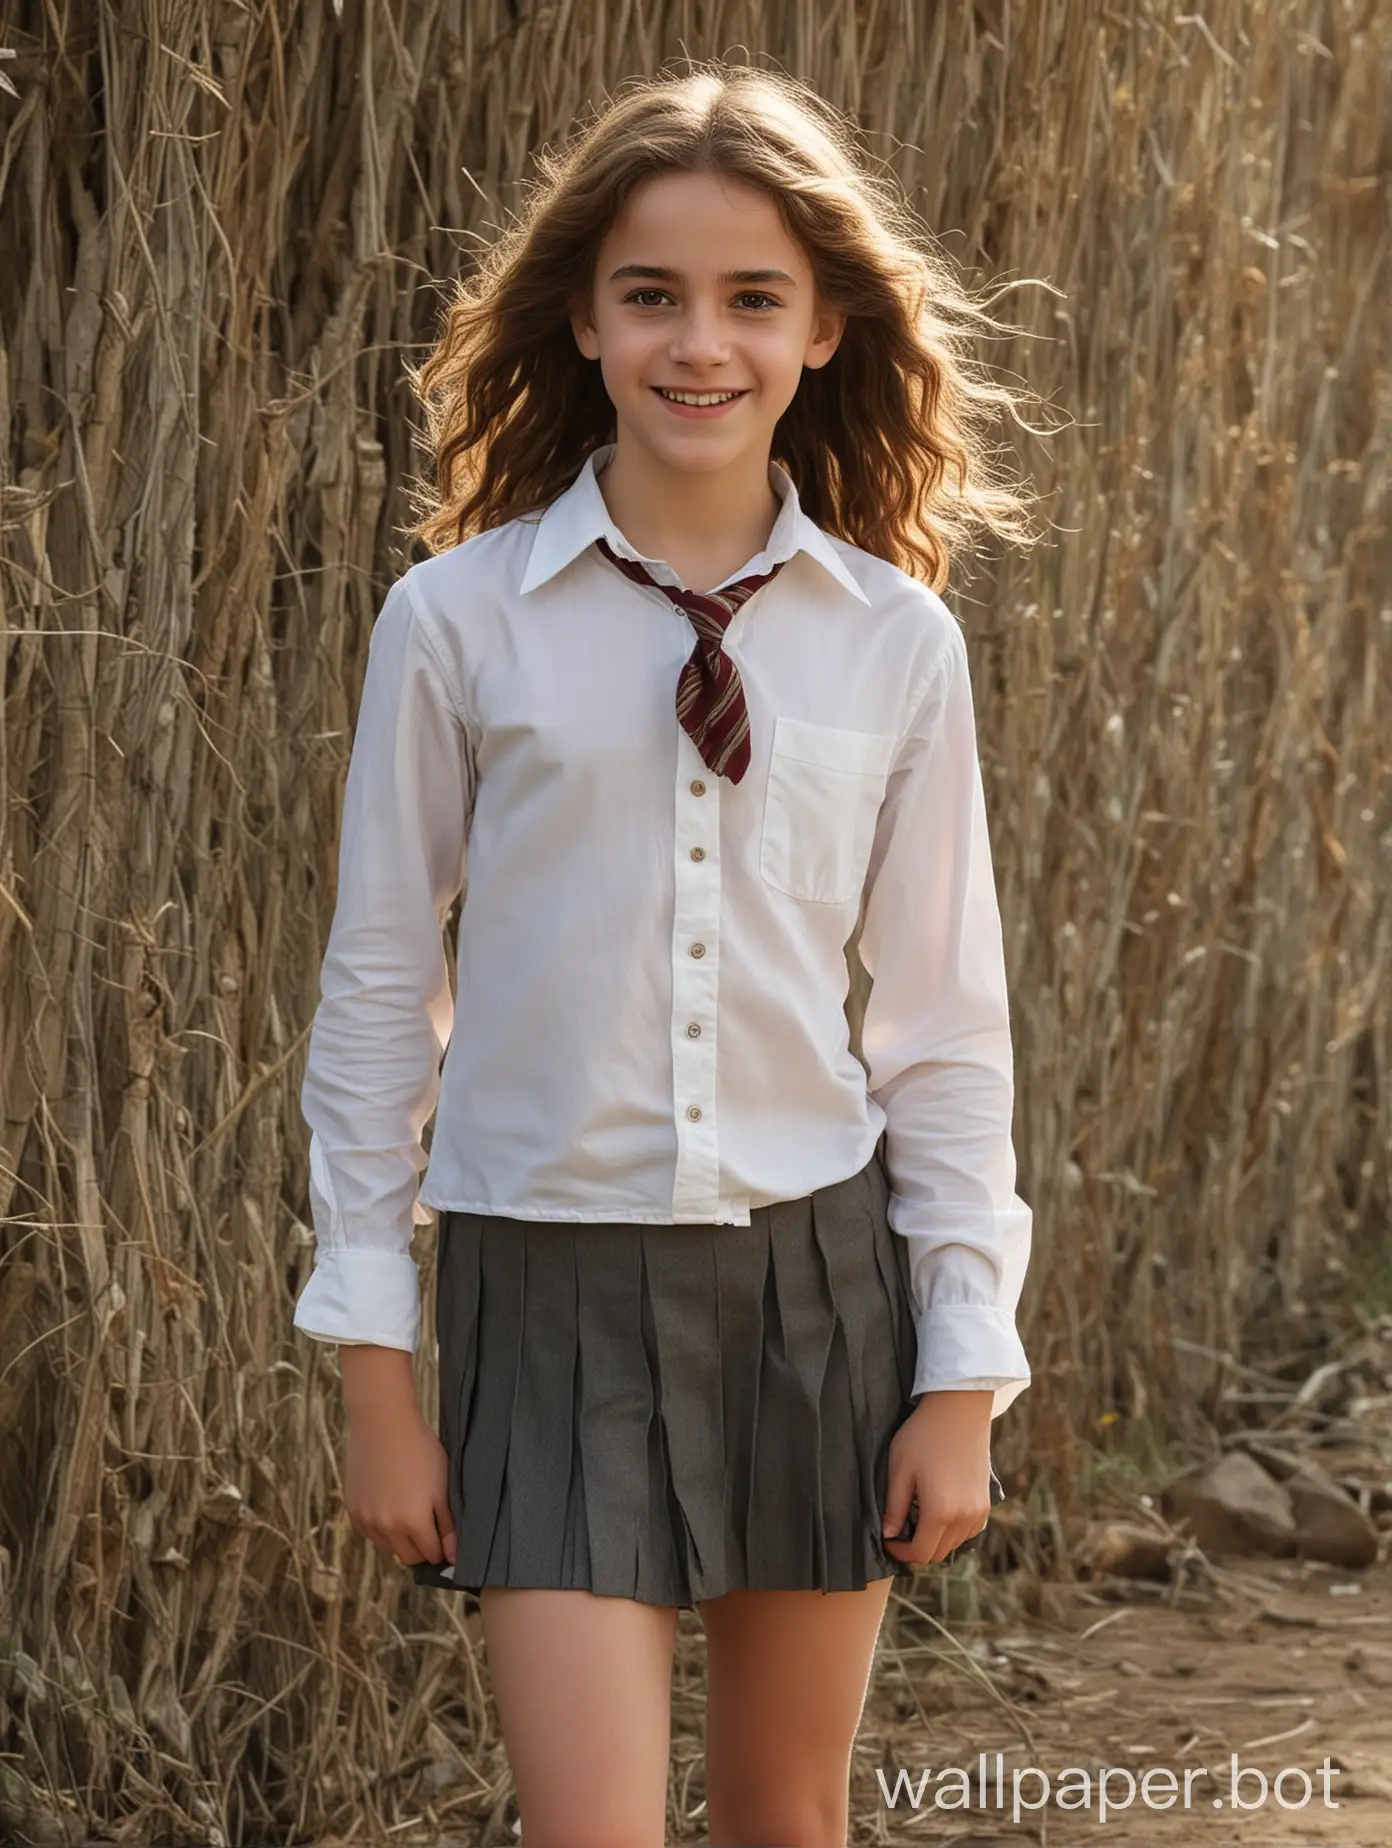 Smiling-Hermione-Granger-11YearOld-Girl-in-Casual-Attire